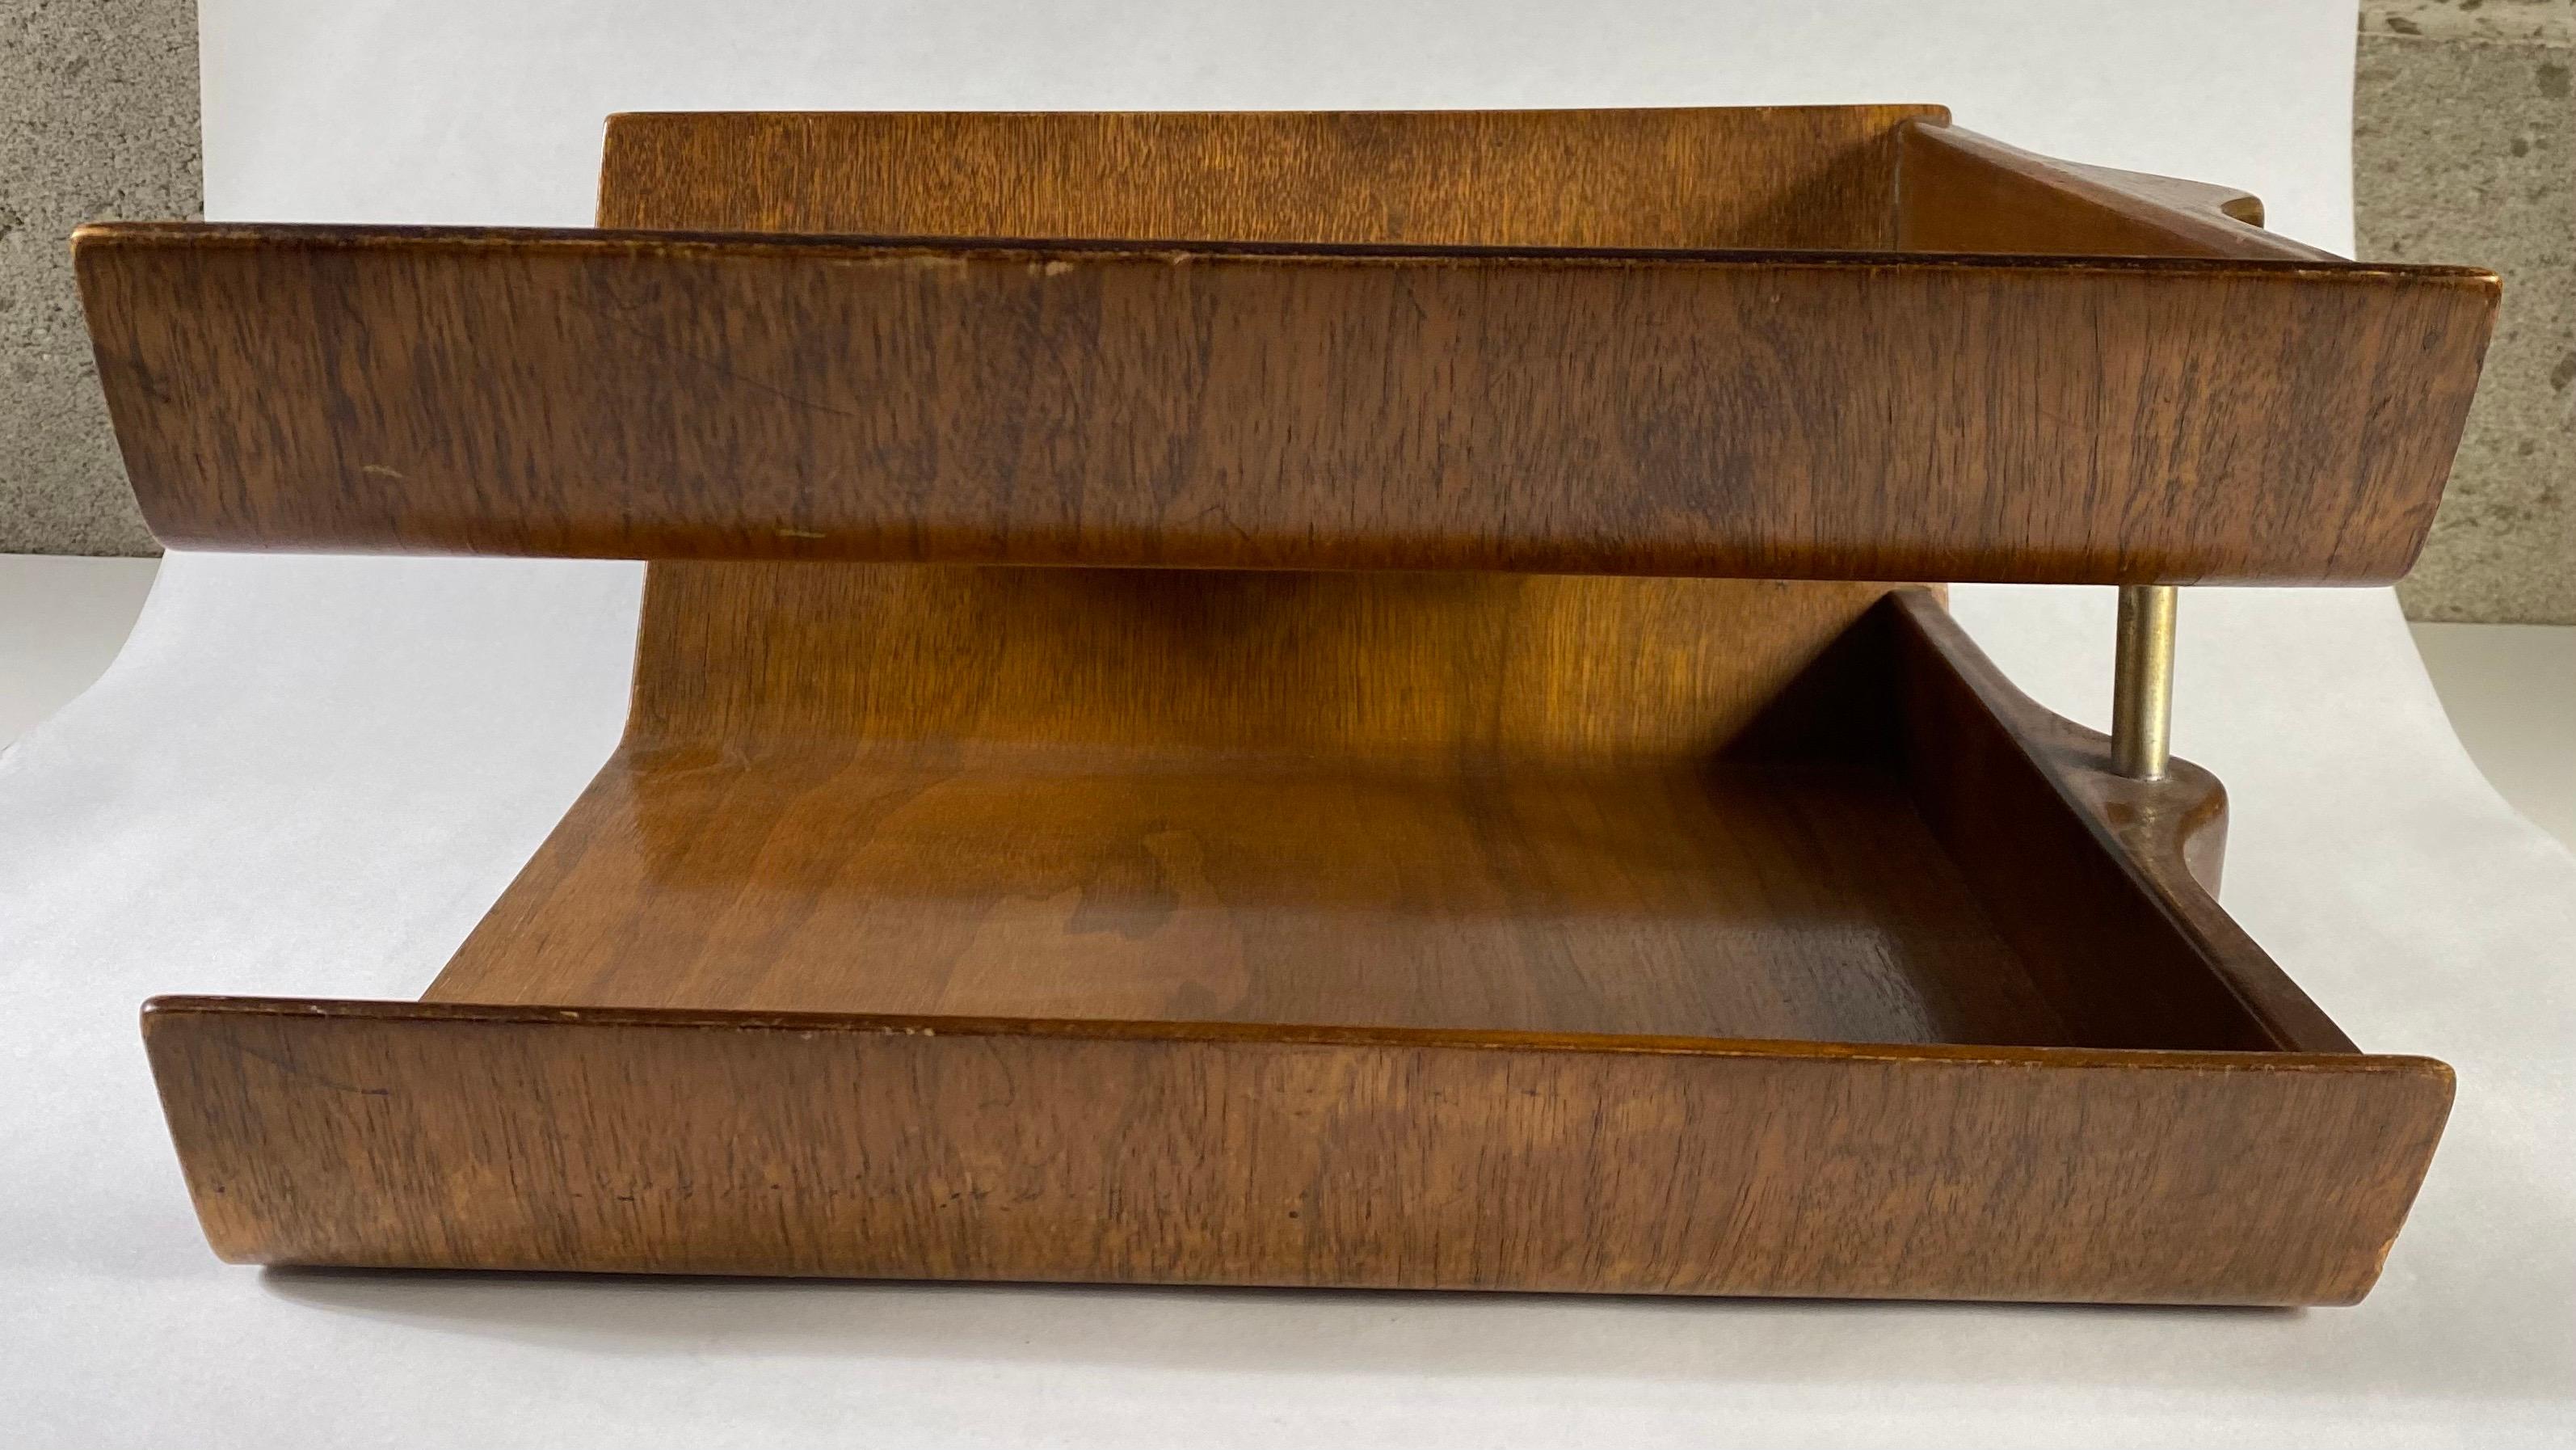 A two- tier paper filing desk organizer by Florence Knoll.